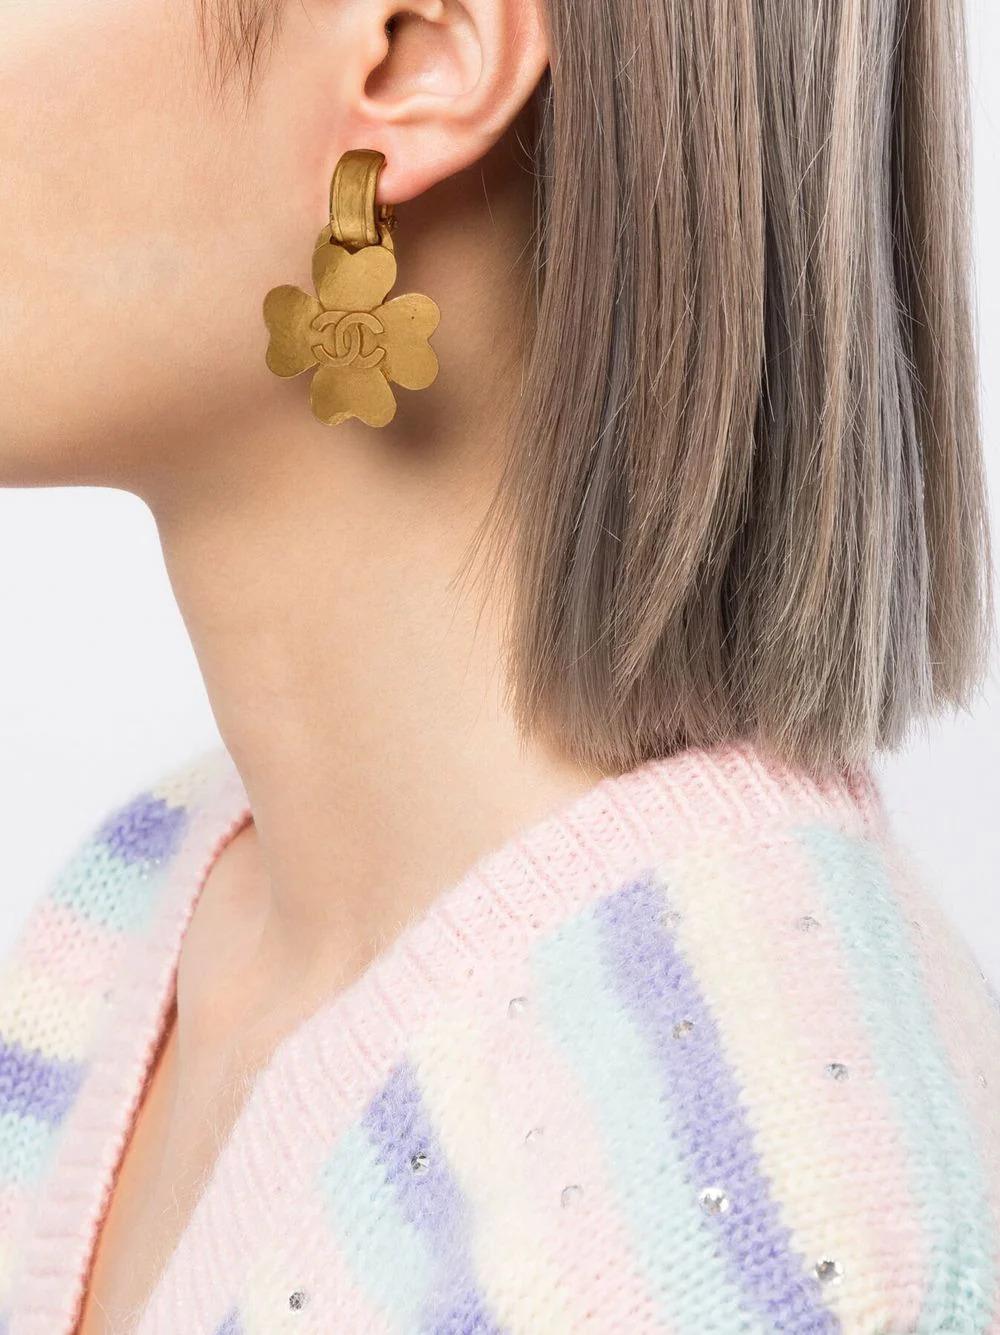 Sure to make a statement, these 1995 vintage clip-on earrings feature a gold-toned four-leaf clover hanging from a small hoop, finished with an interlocking 'CC' logo in the center. Designed with a clip-on fastening, simply clip them onto your ear